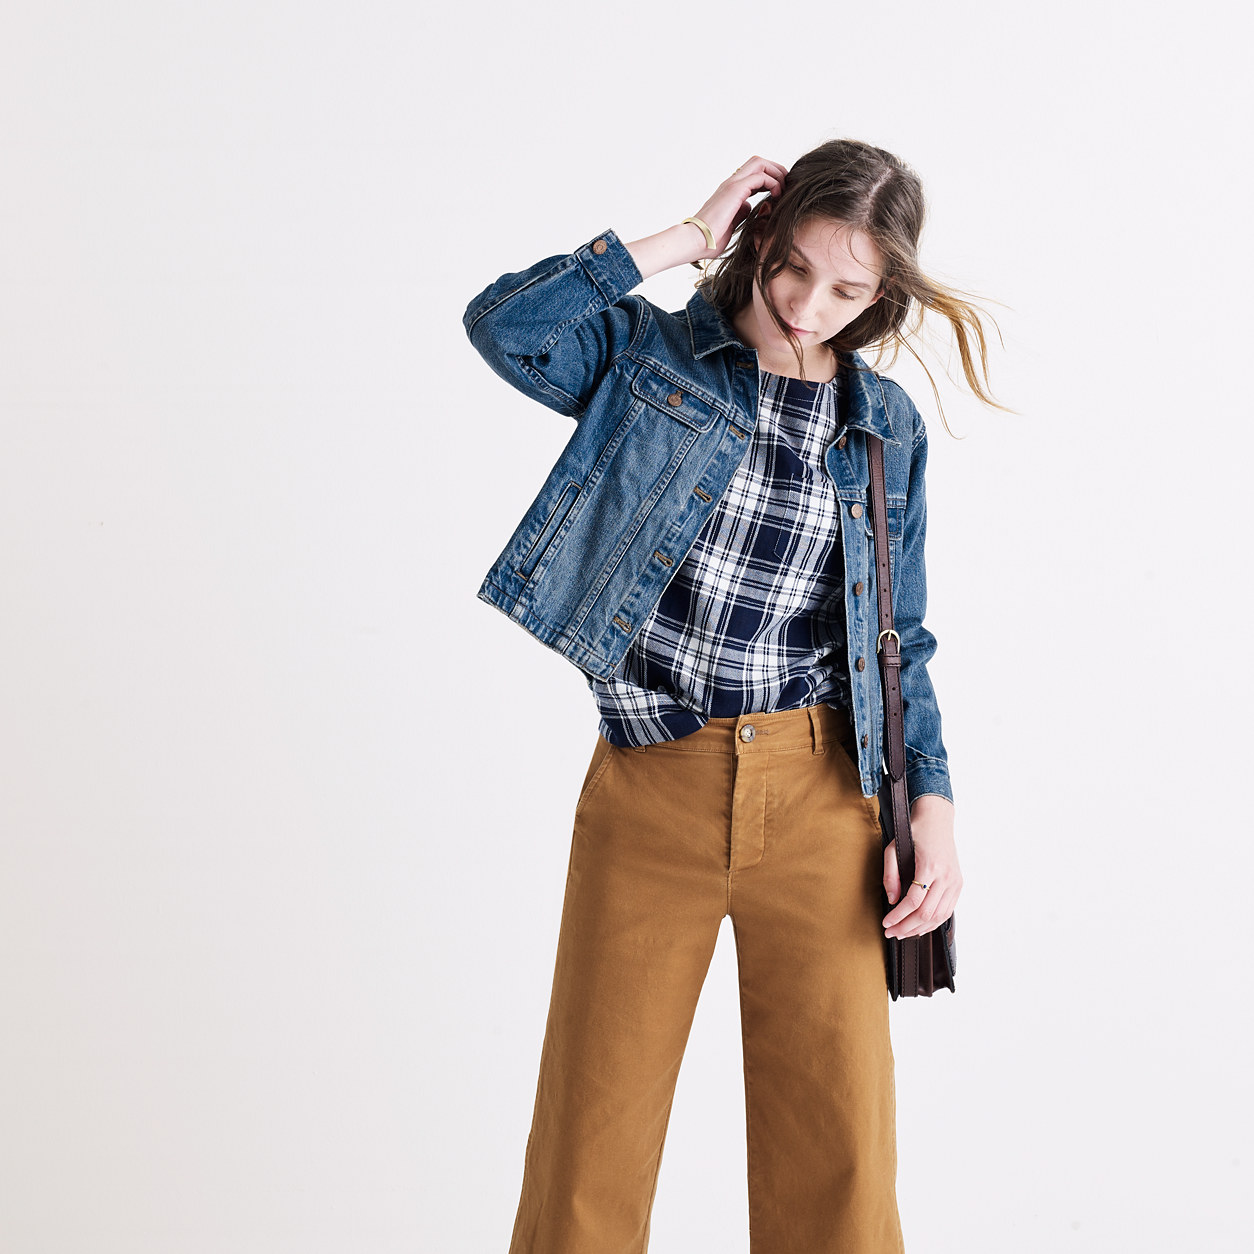 The Jean Jacket in Pinter Wash : even more denim | Madewell